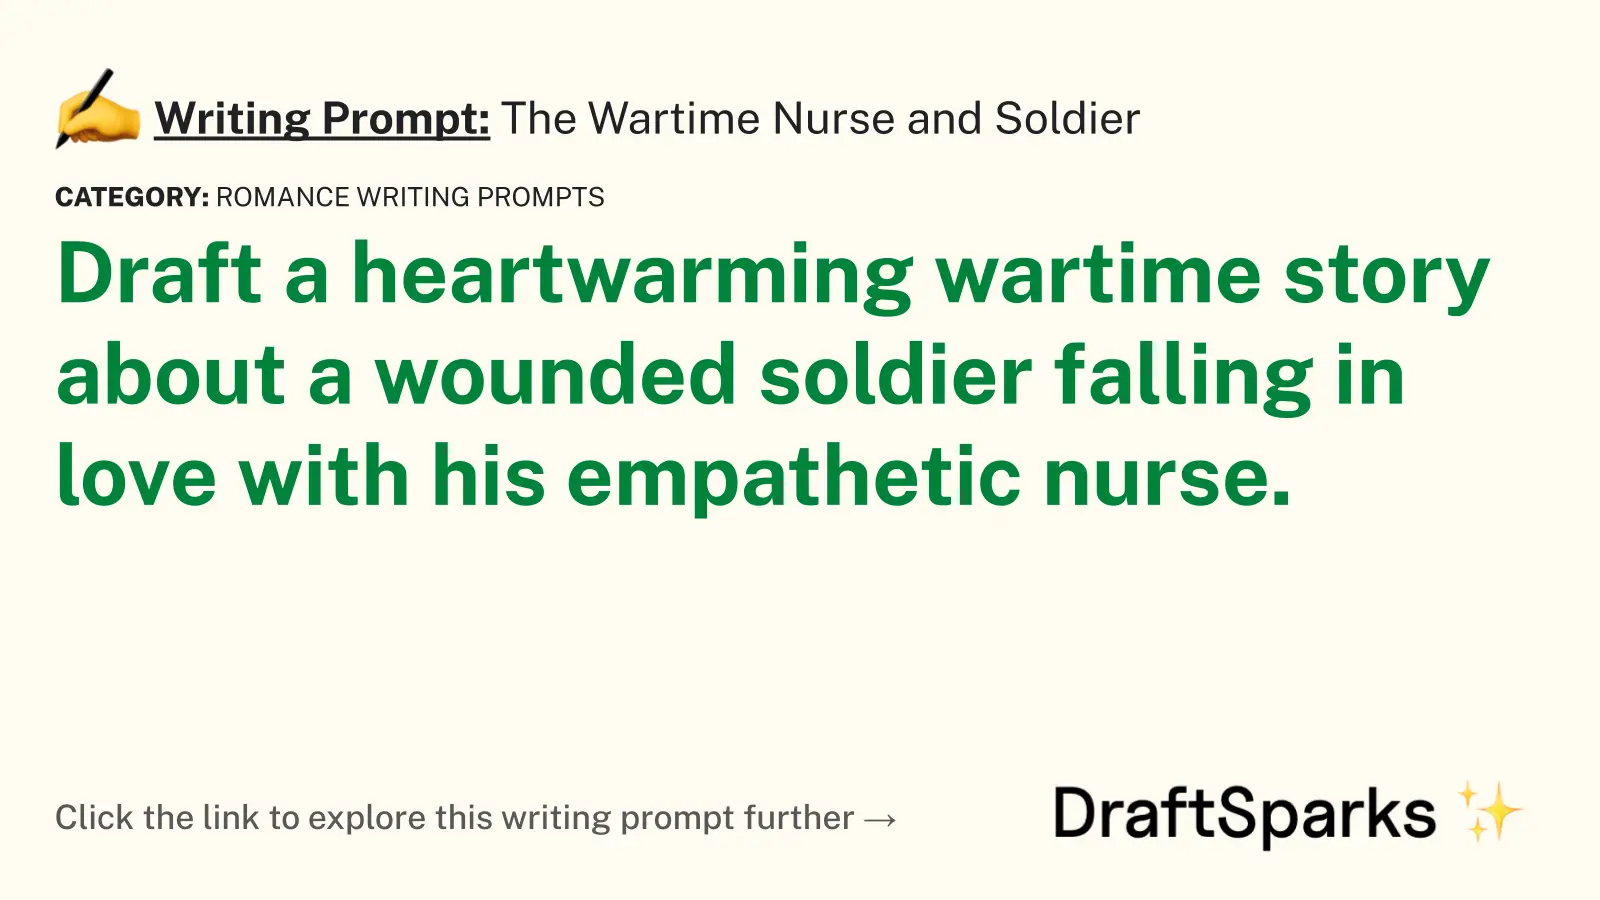 The Wartime Nurse and Soldier